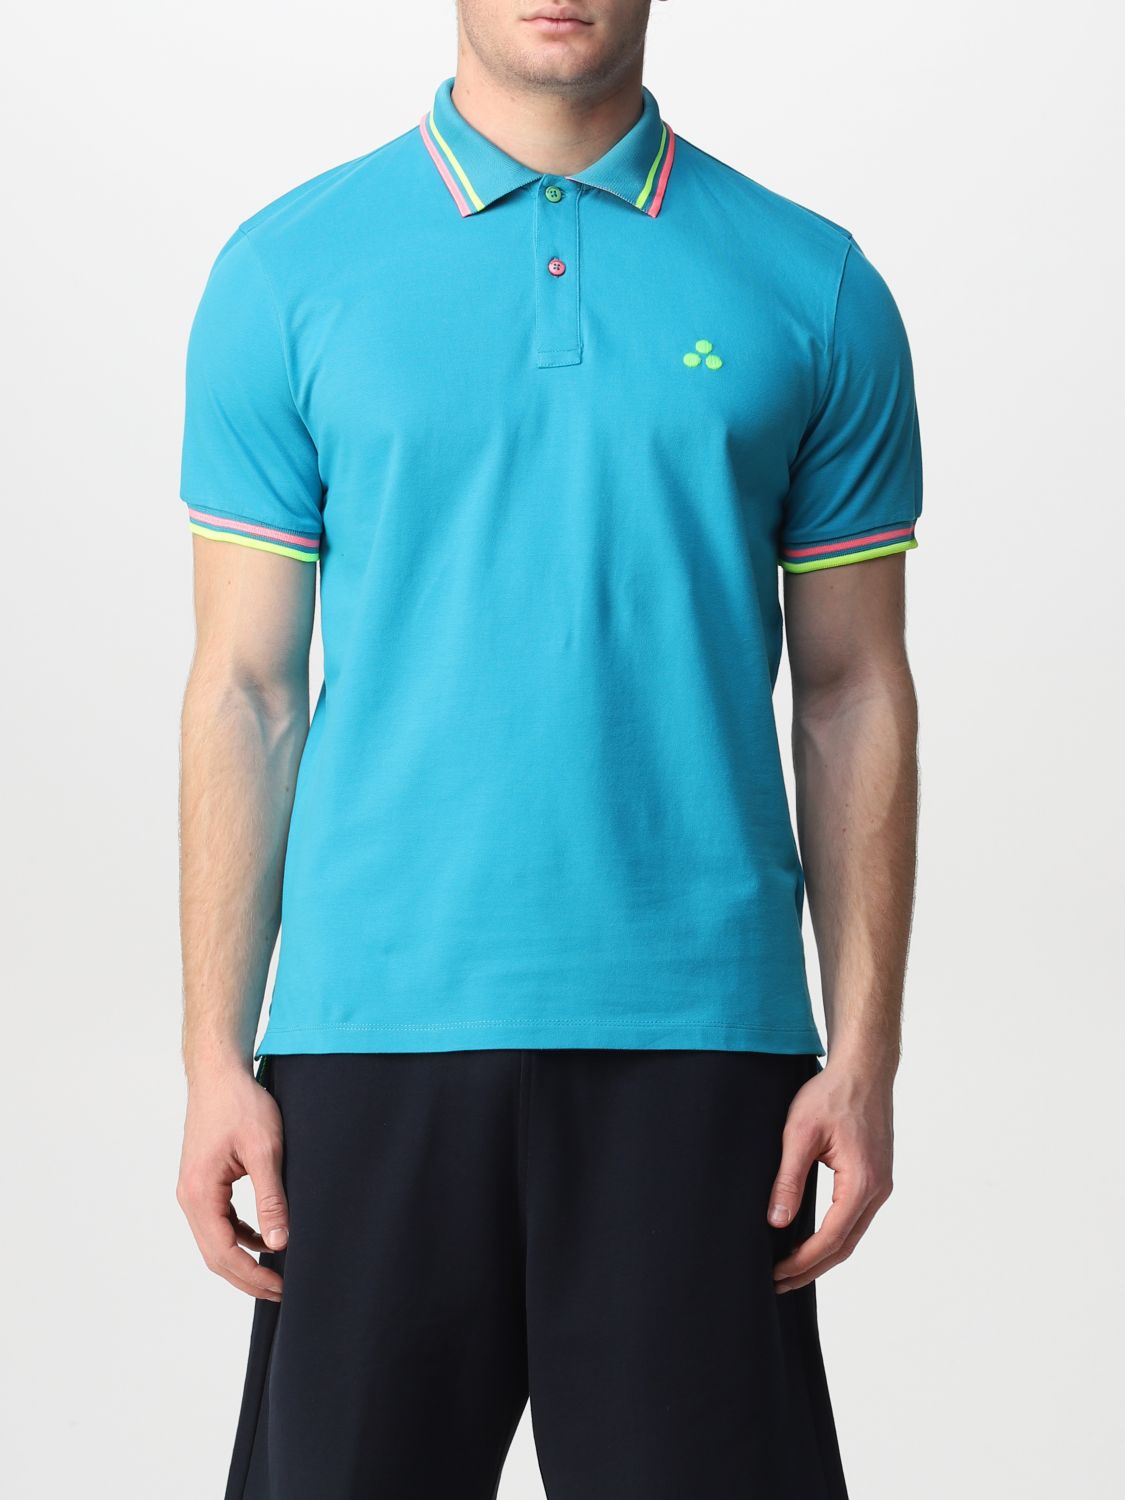 Peuterey Outlet: polo shirt for man - Turquoise | Peuterey polo shirt ...